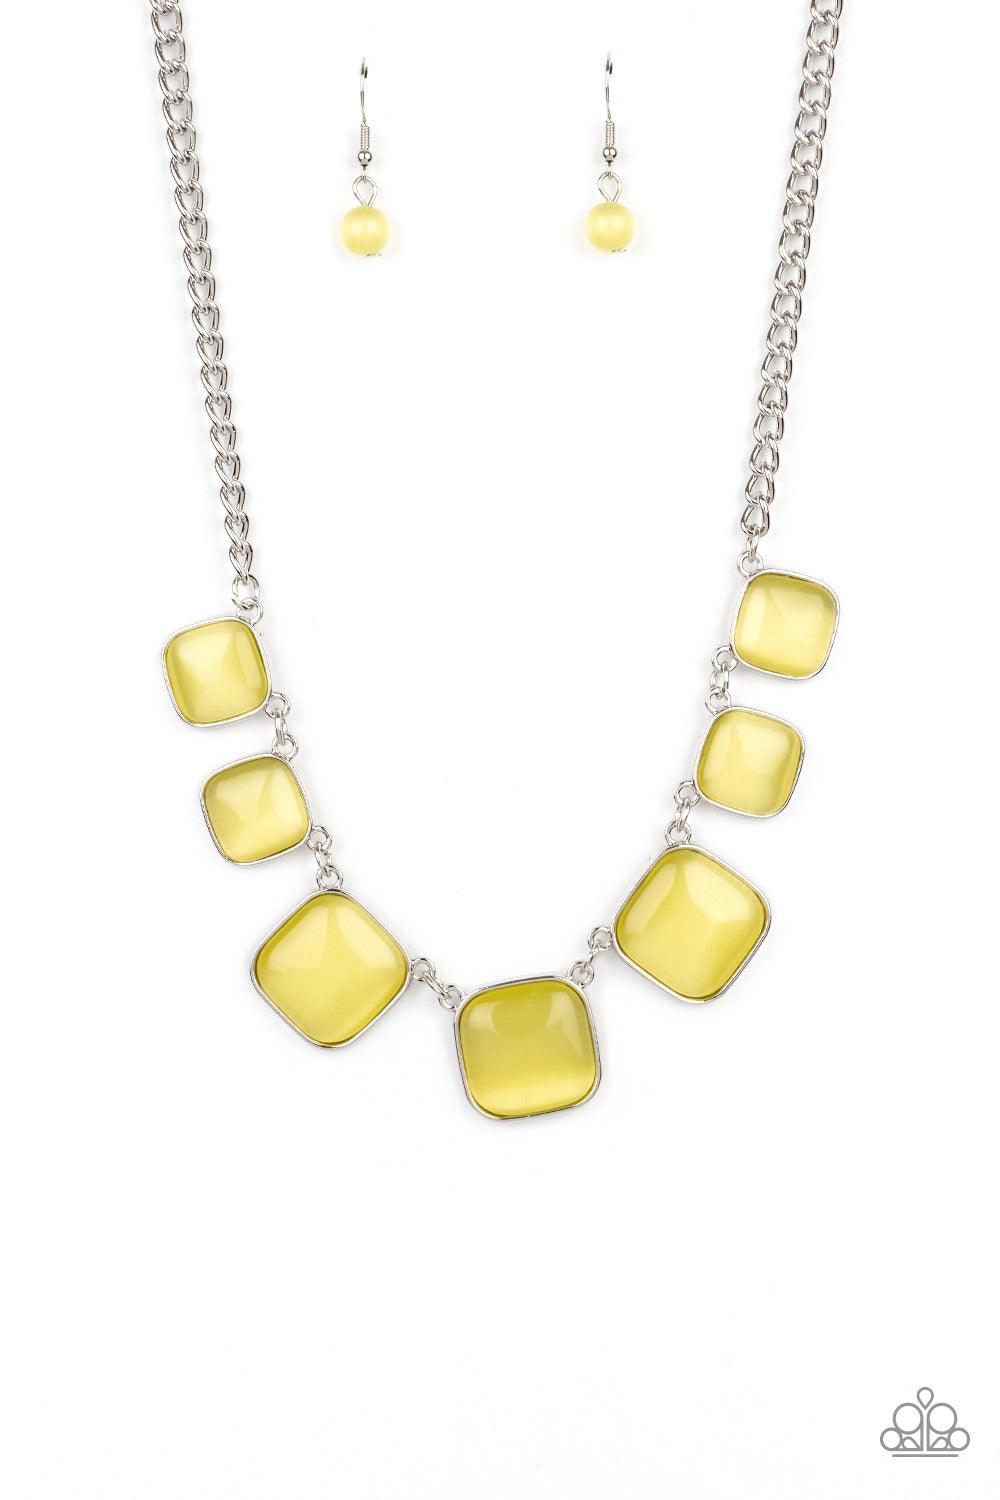 Paparazzi Accessories Aura Allure - Yellow Encased in square silver fittings, a dewy collection of Illuminating cat's eye stones gradually increase in size as they link below the collar for a whimsical pop of color. Features an adjustable clasp closure. S